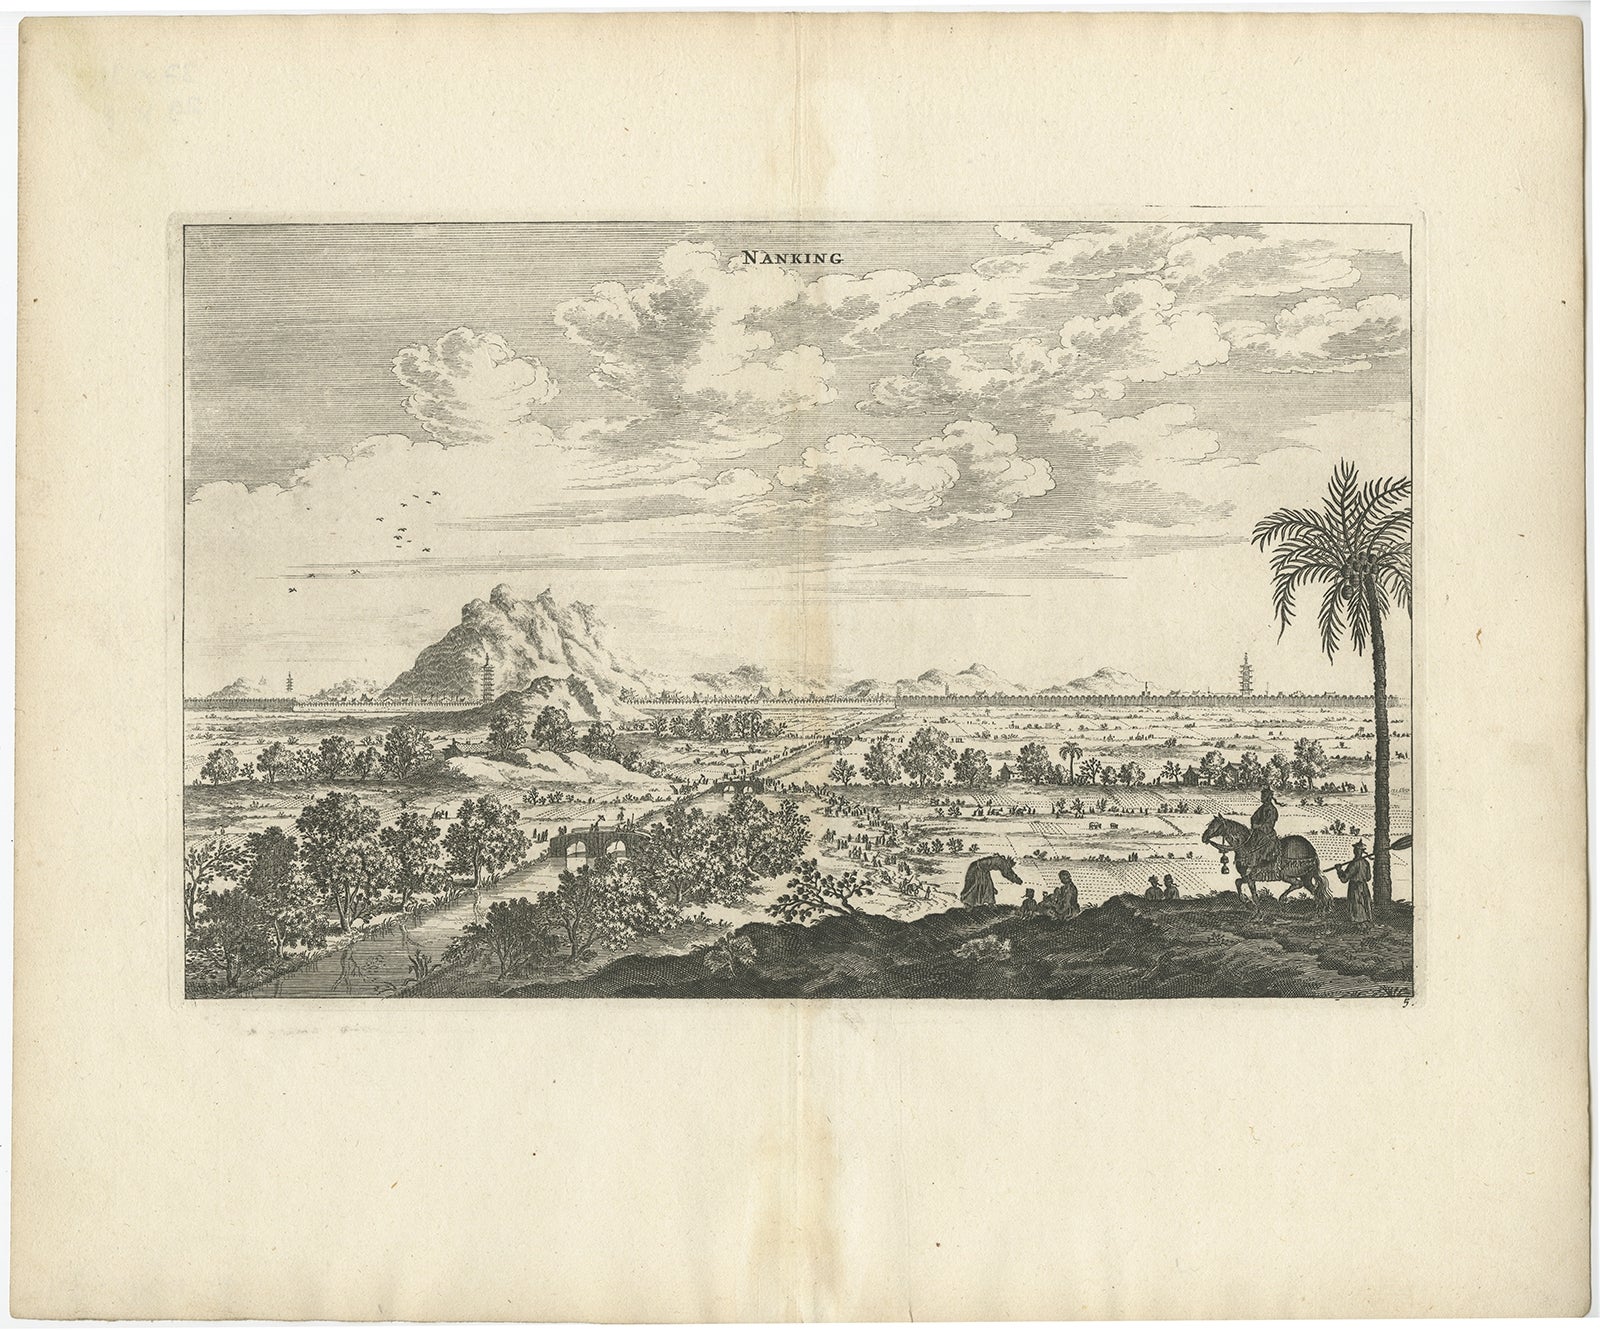 Antique print China titled ‘Nanking'. This plate shows a view on the Chinese city of Nanking with its ramparts. Also depicted are several pagodas and on the foreground there is a palm tree. This print originates from the Latin edition of Nieuhof's